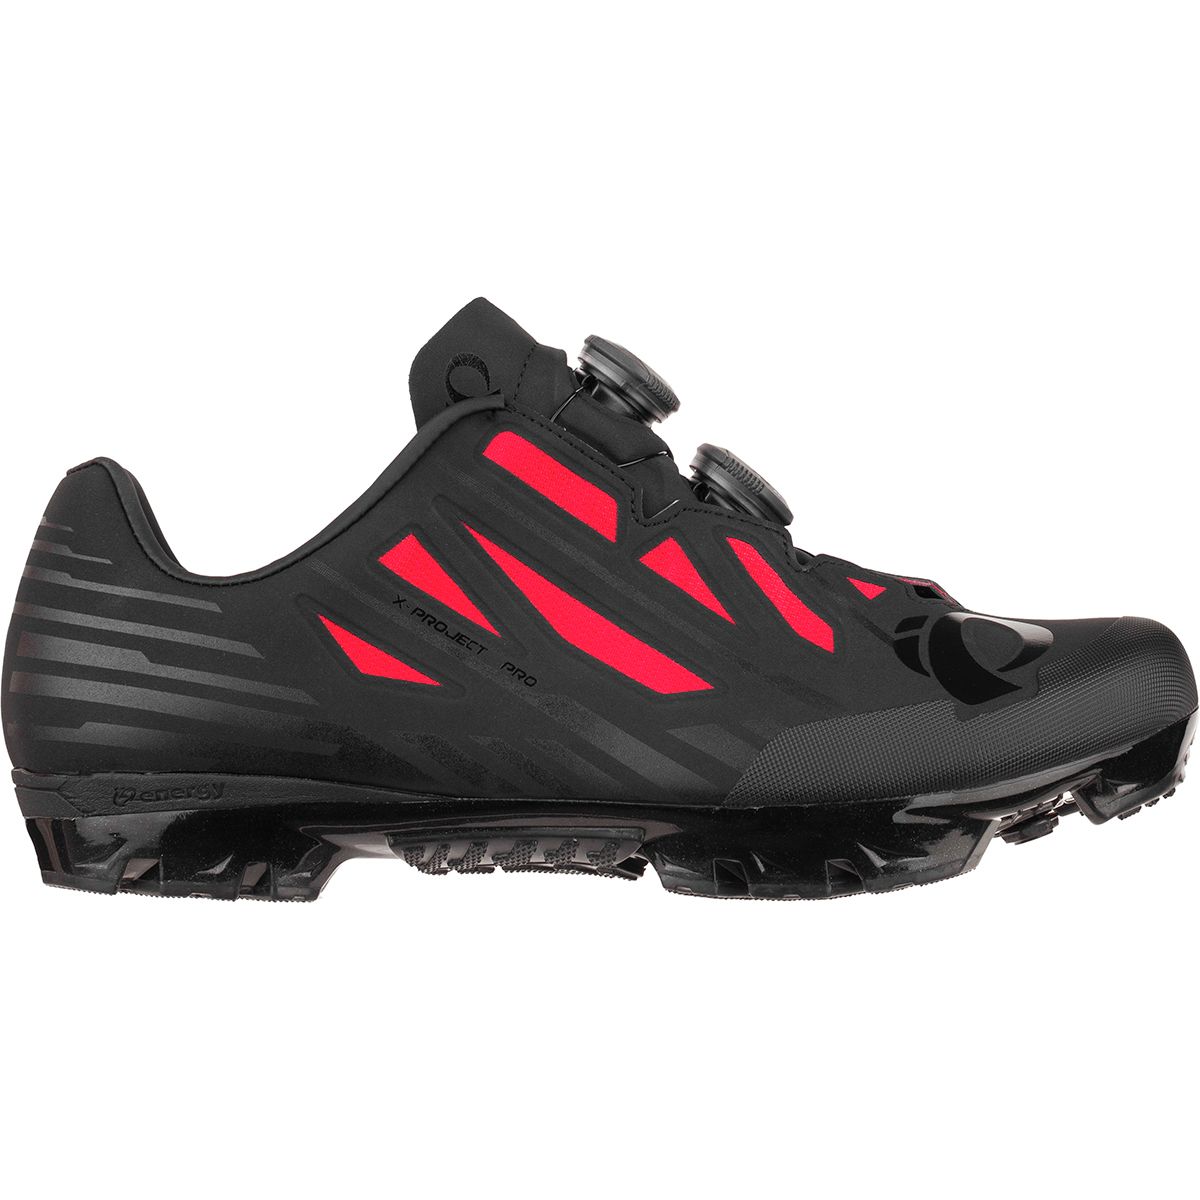 Pearl Izumi X-Project P.R.O. Limited Edition Cycling Shoe - Men's